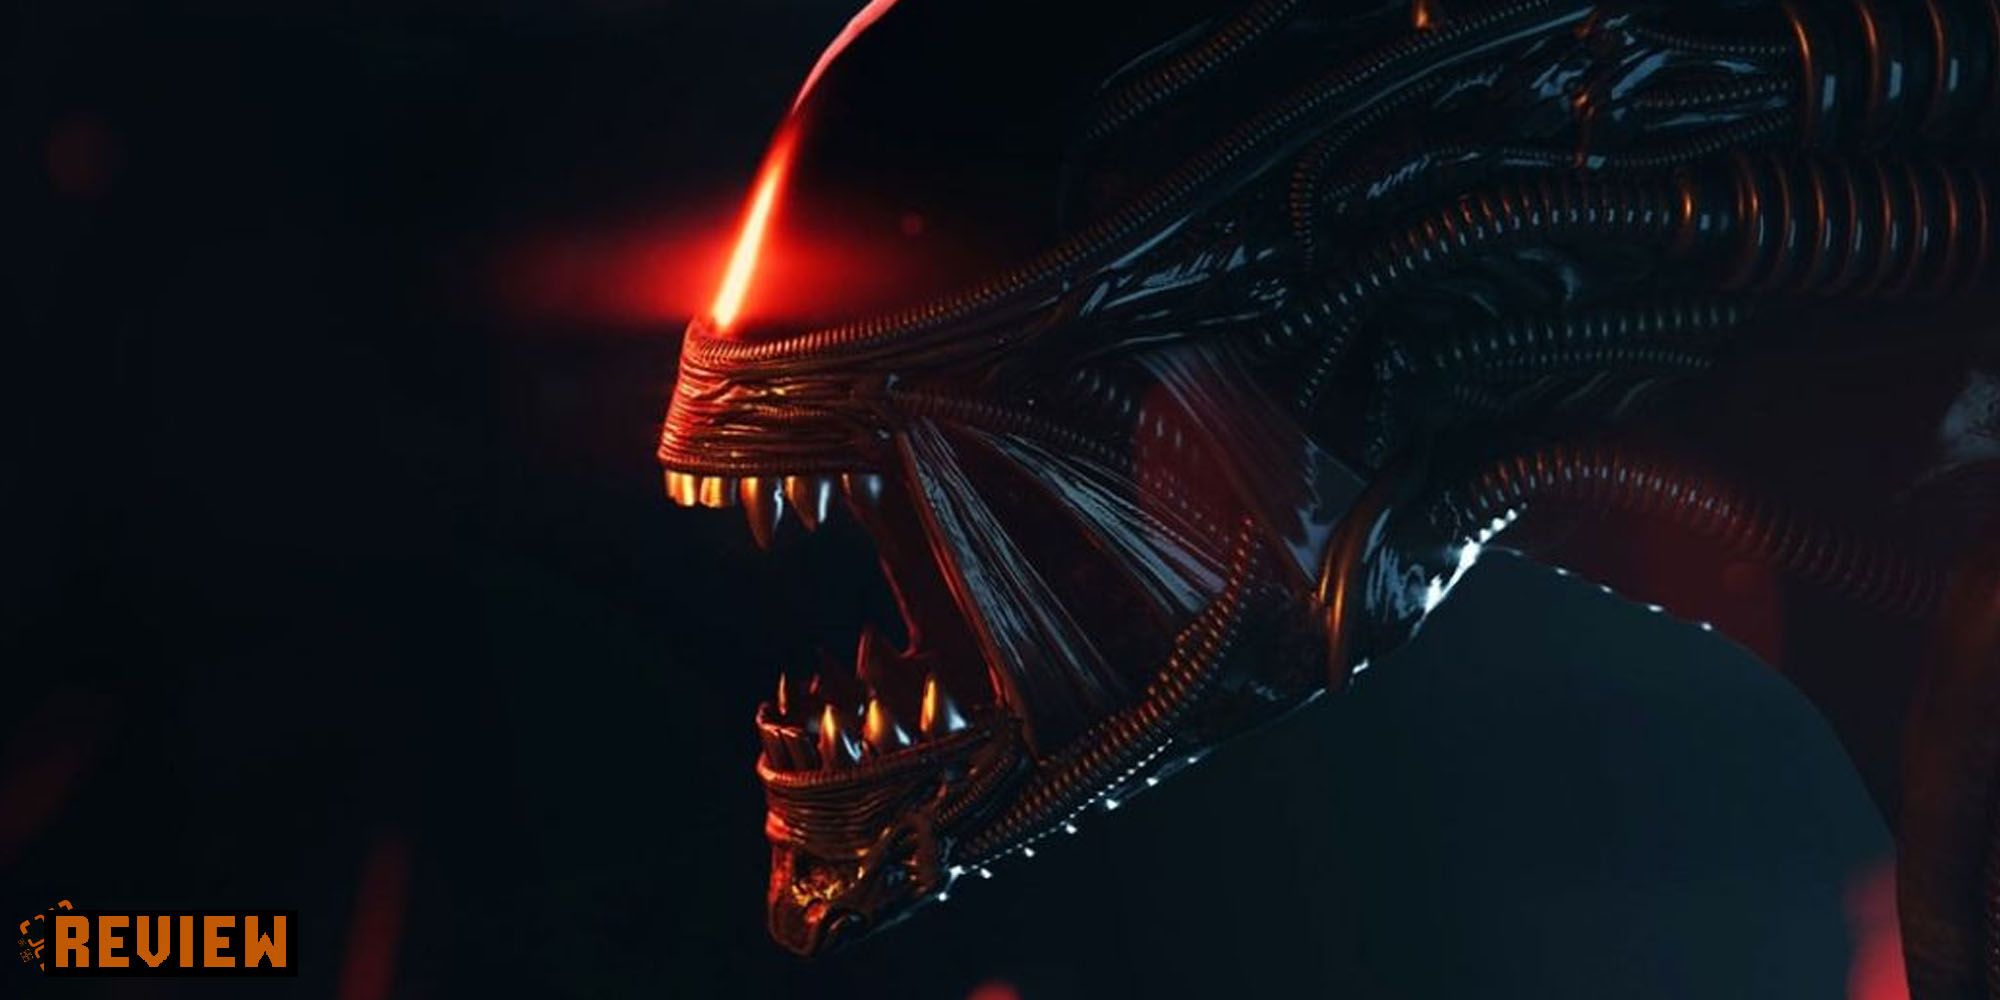 Xenomorph from Aliens: Dark Descent opening its mouth with the word 'Review' in the bottom left corner